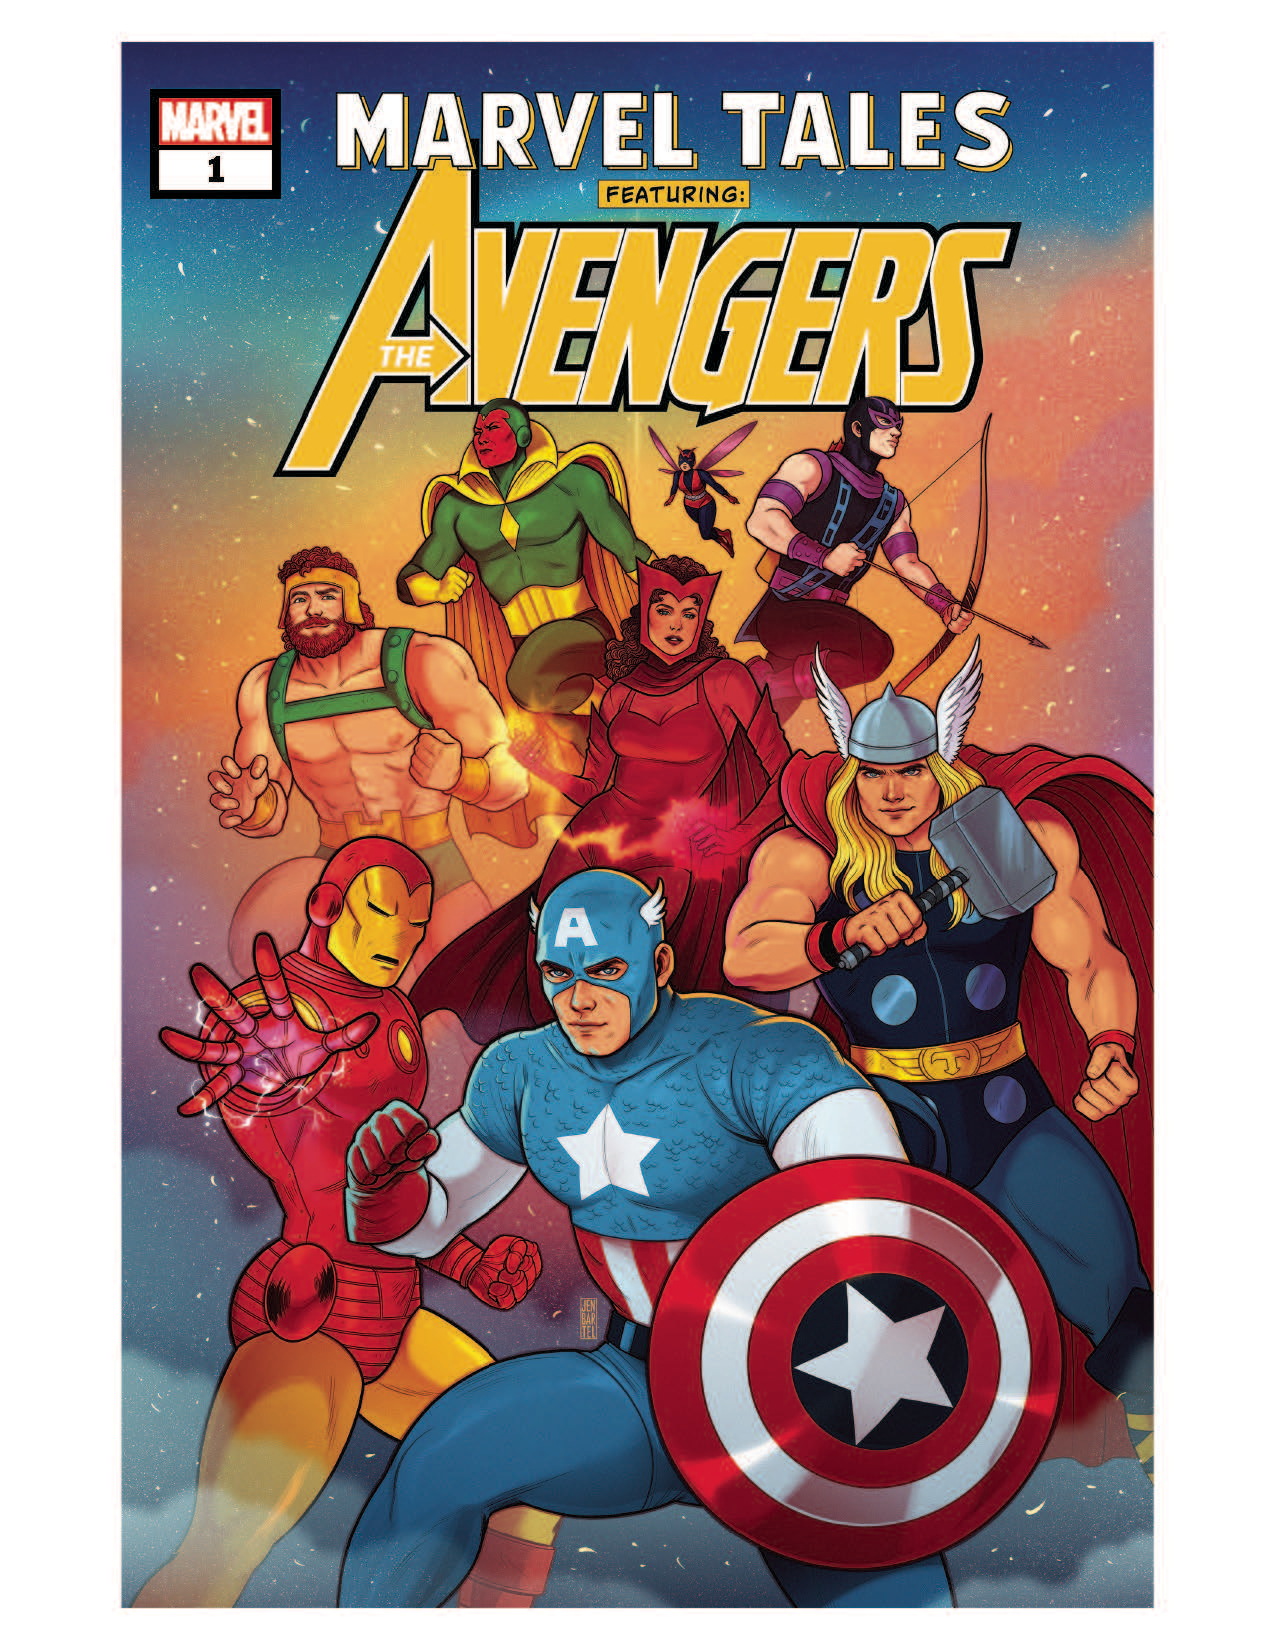 Marvel Tales: Avengers no. 1 (2019 Series)